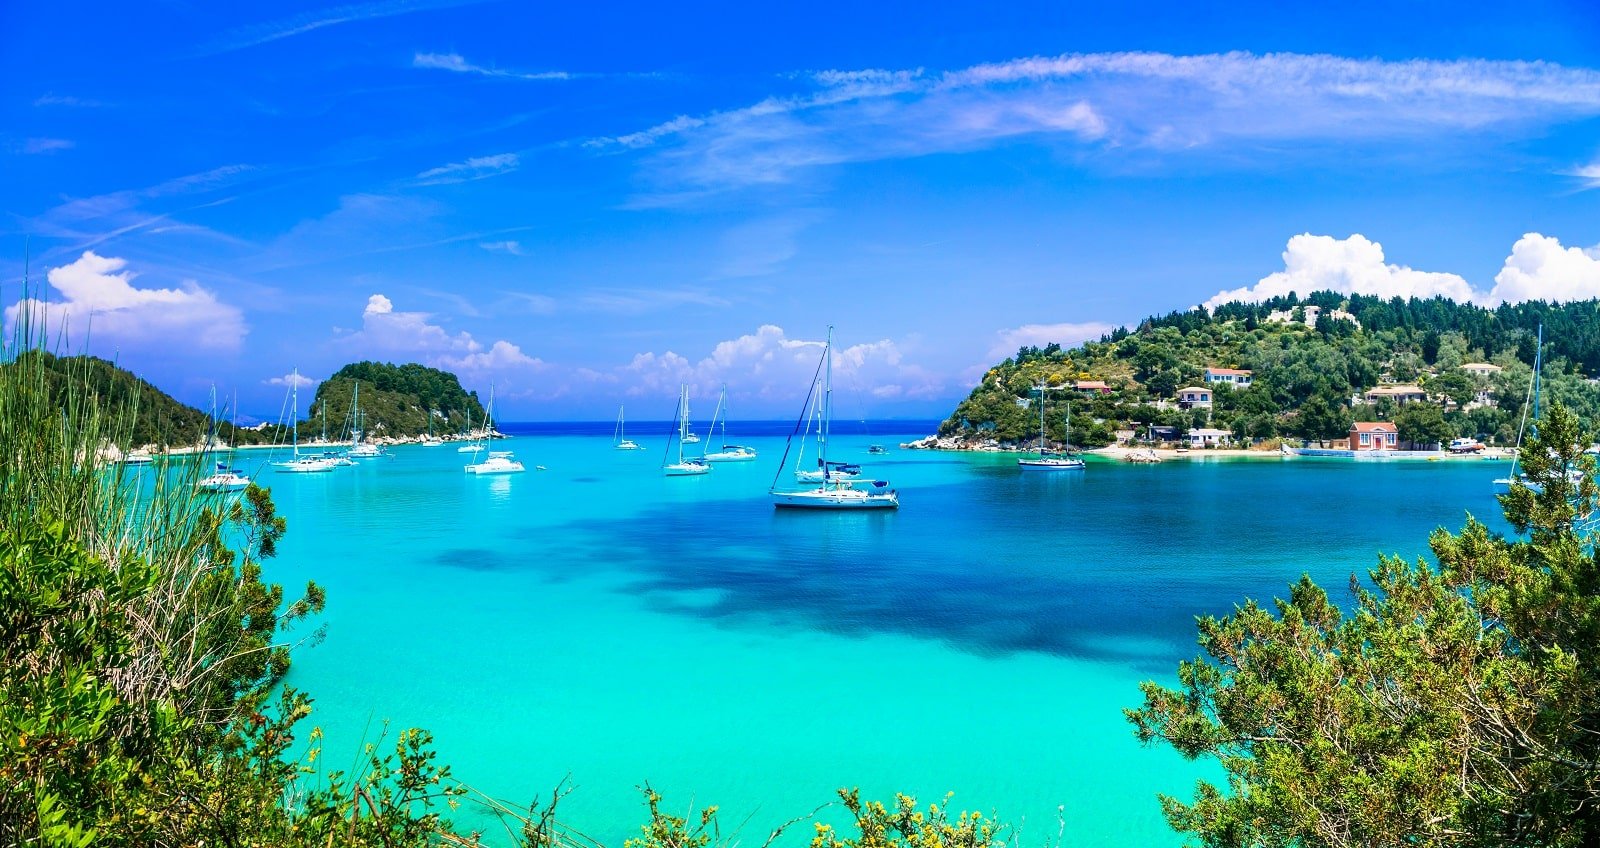 <p><span>The island of Corfu in the Ionian Sea is a picturesque locale for sailing beginners. Its clear, calm waters and gentle winds make it an ideal place to learn. Sailing schools in Corfu often combine lessons with exploration of the island’s stunning coastlines and beaches.</span></p> <p><b>Insider’s Tip: </b><span>Opt for a sailing course that includes island-hopping around the Ionian Islands.</span></p> <p><b>When to Travel: </b><span>Late spring to early autumn for the best sailing weather.</span></p> <p><b>How to Get There: </b><span>Fly to Corfu International Airport or take a ferry from mainland Greece.</span></p>